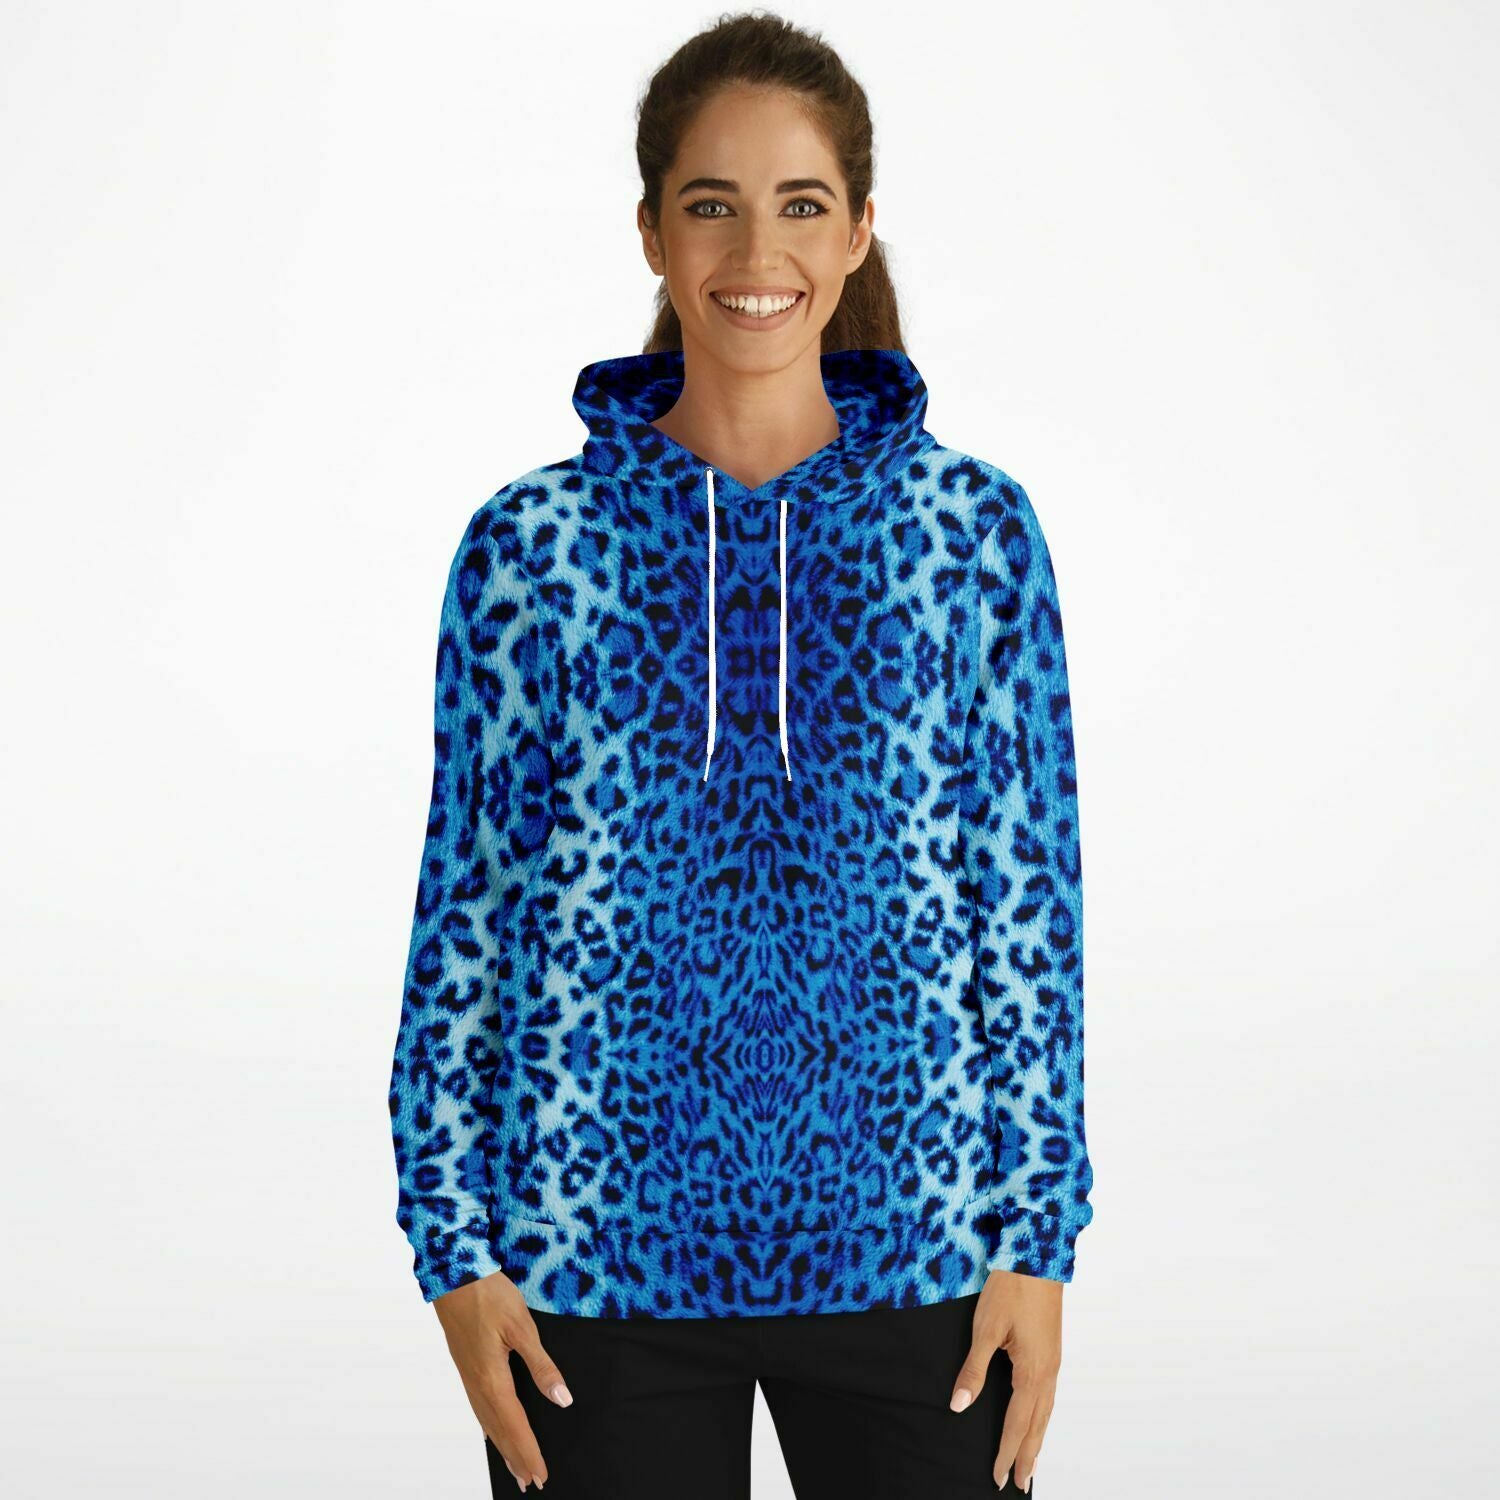 fashion hoodie with blue leopard print